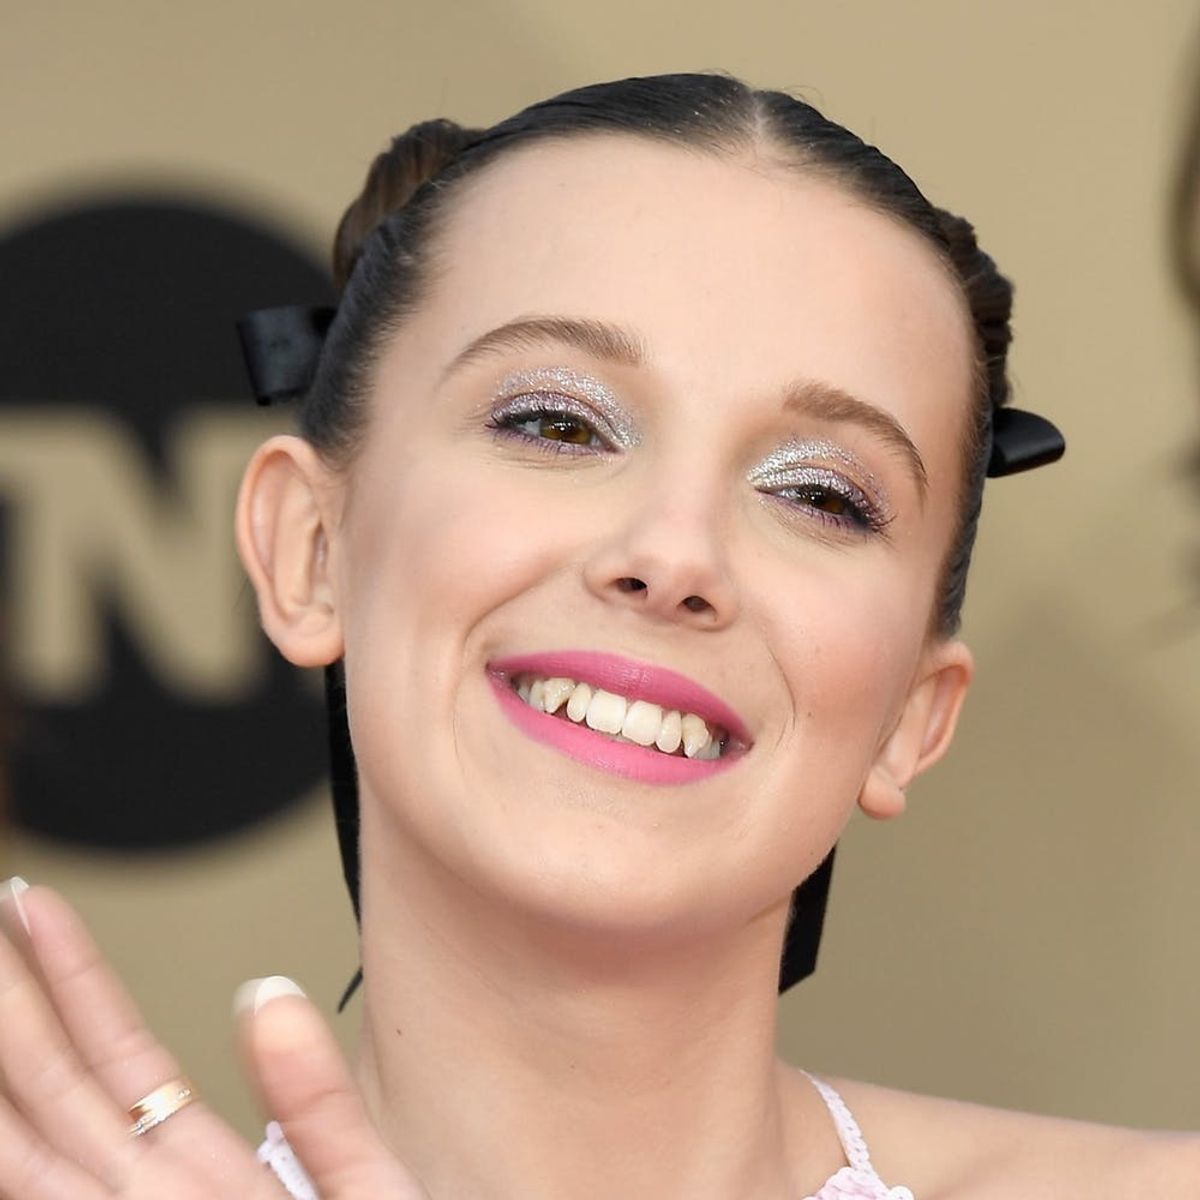 Millie Bobby Brown Just Expertly Pulled Off Converse Sneakers on the 2018 SAG Awards Carpet